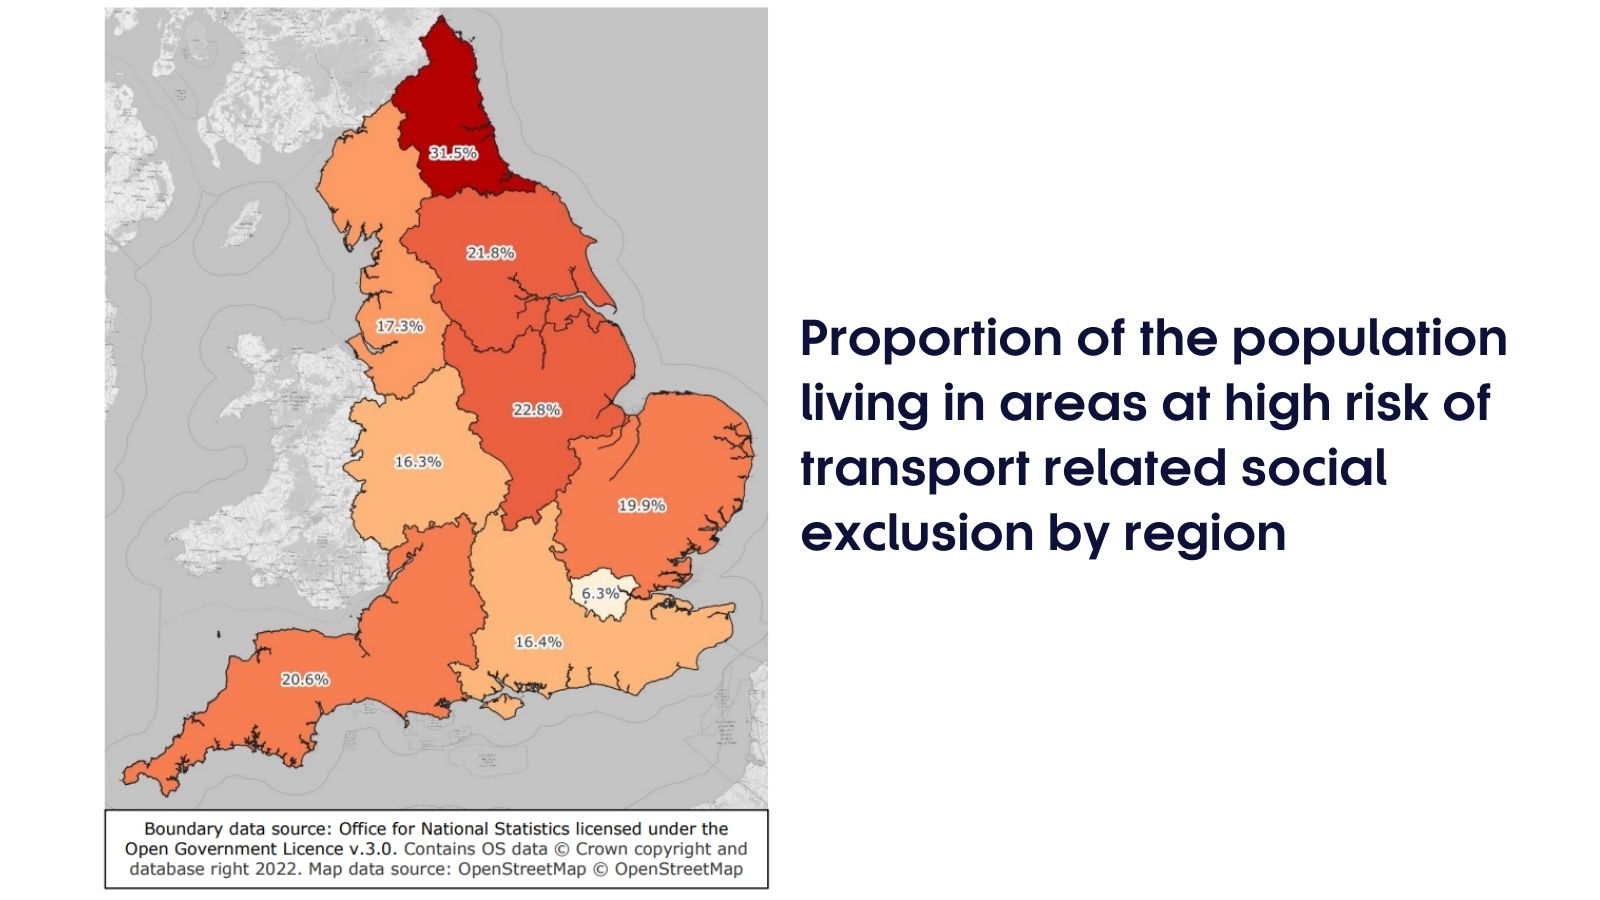 Proportion of the population living in areas at high risk of transport related social exclusion by region